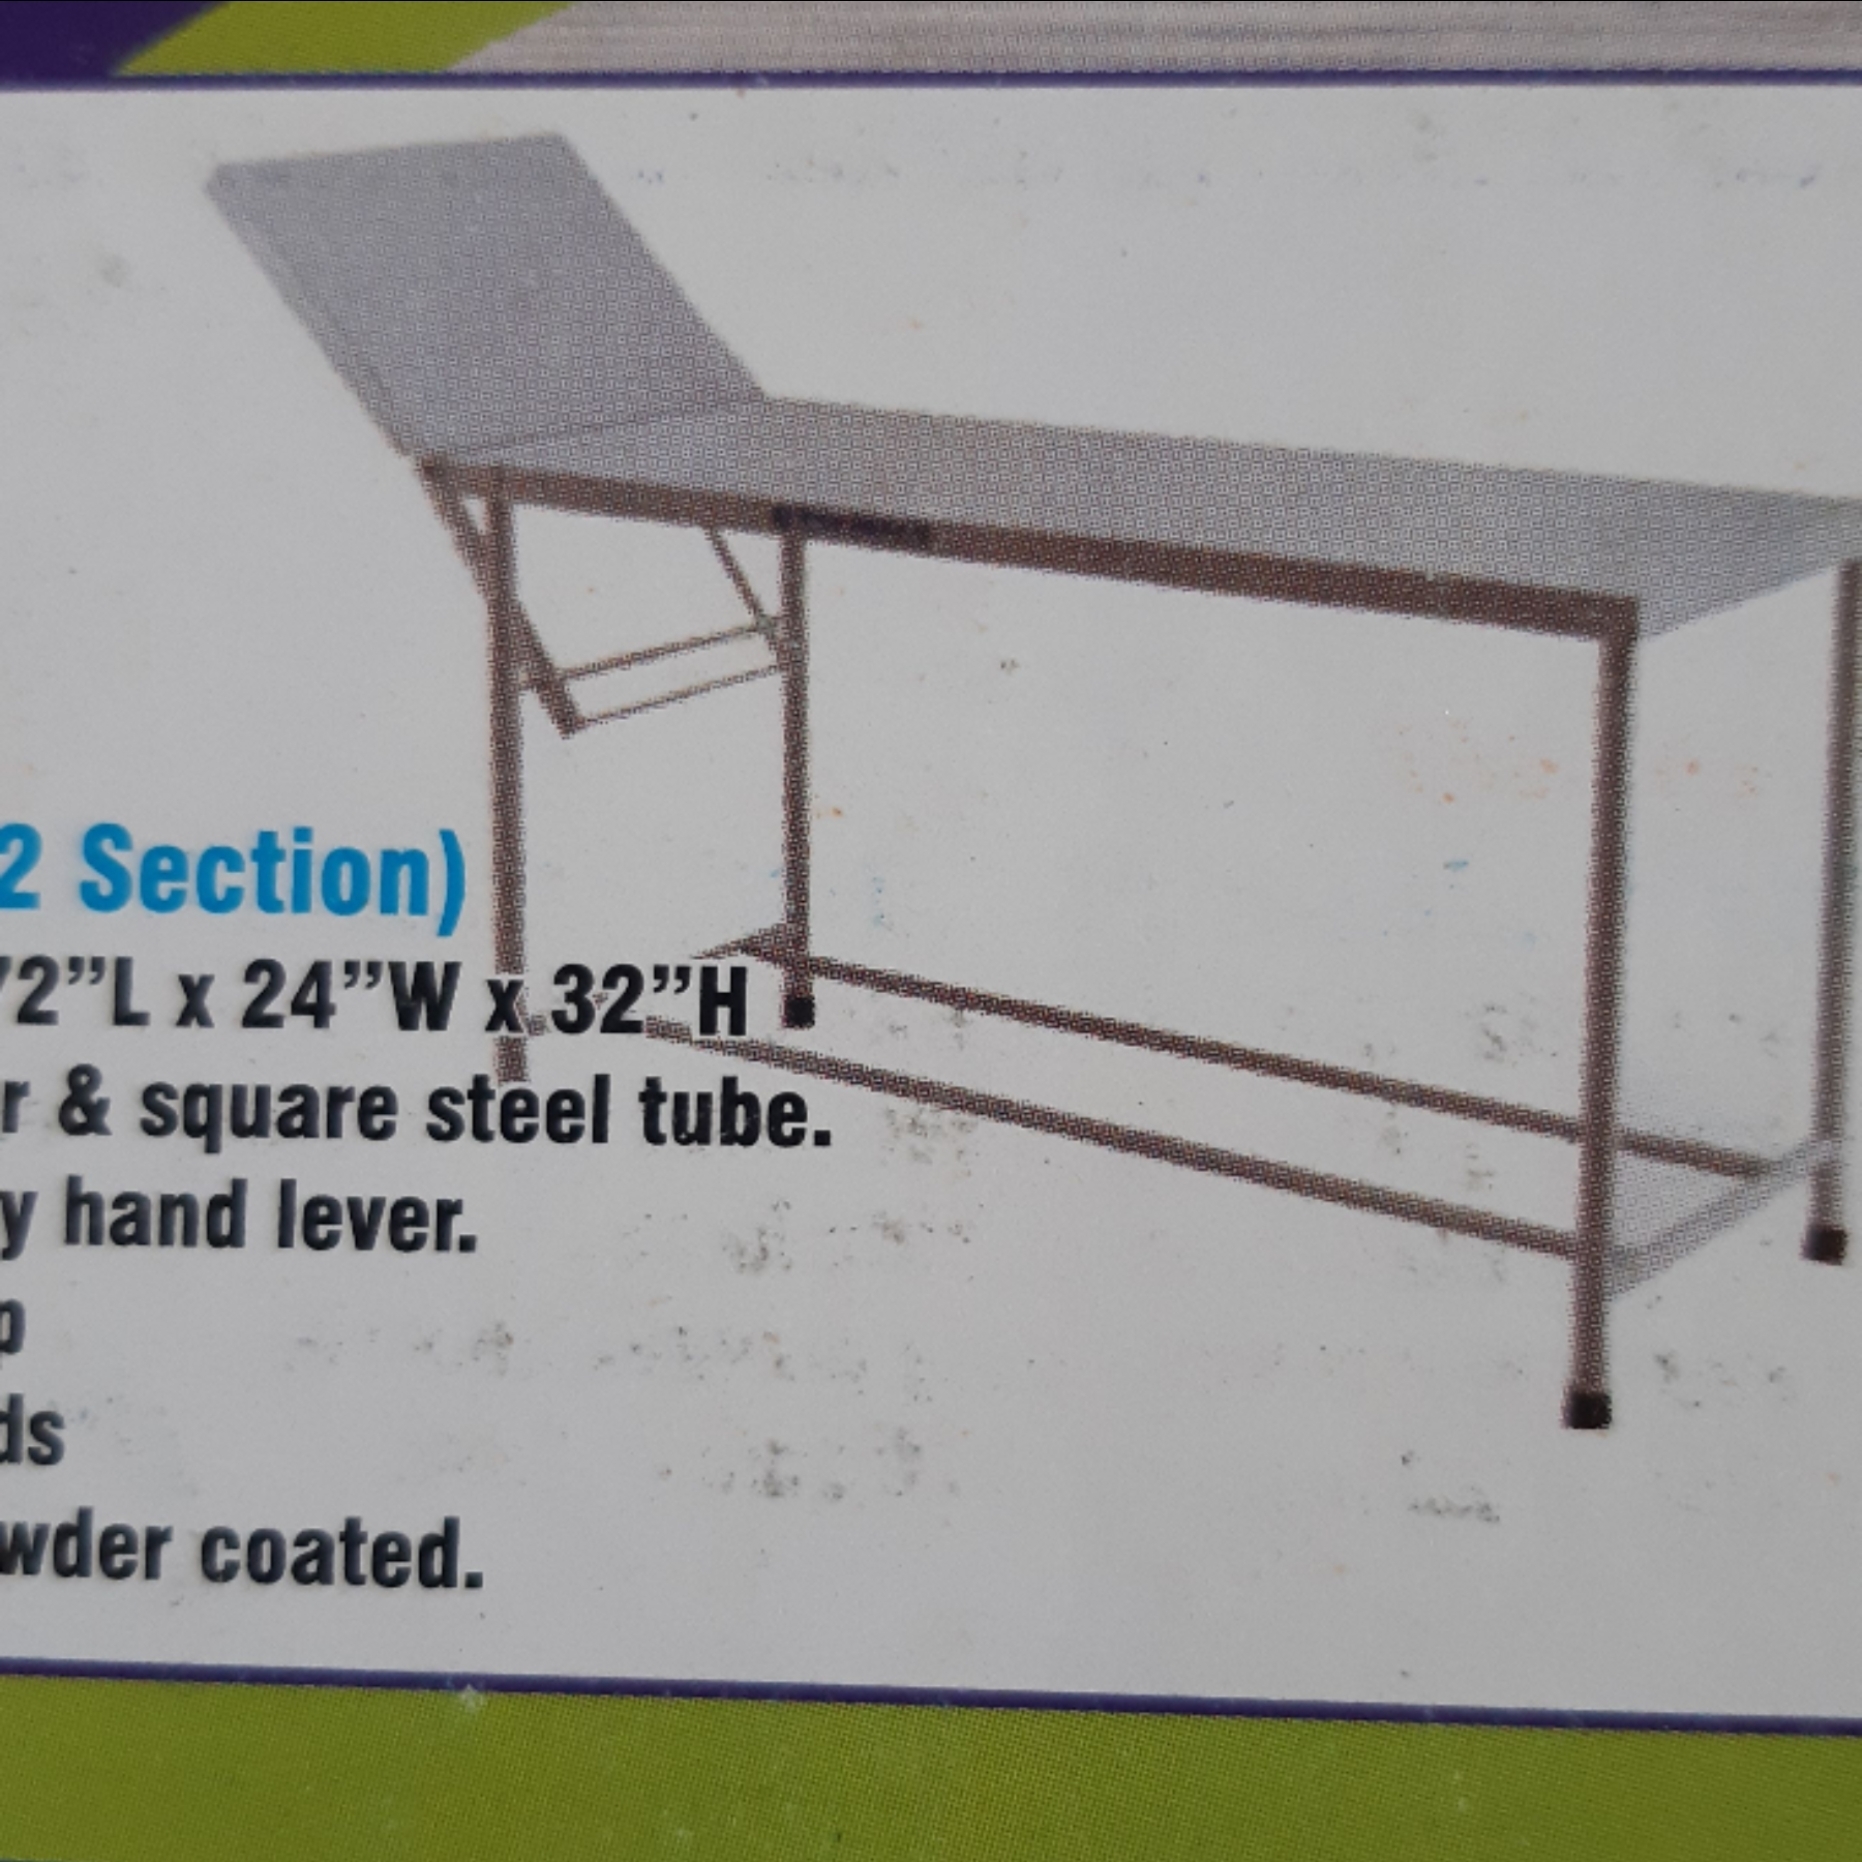 EXAMINATION TABLE 2 SECTION